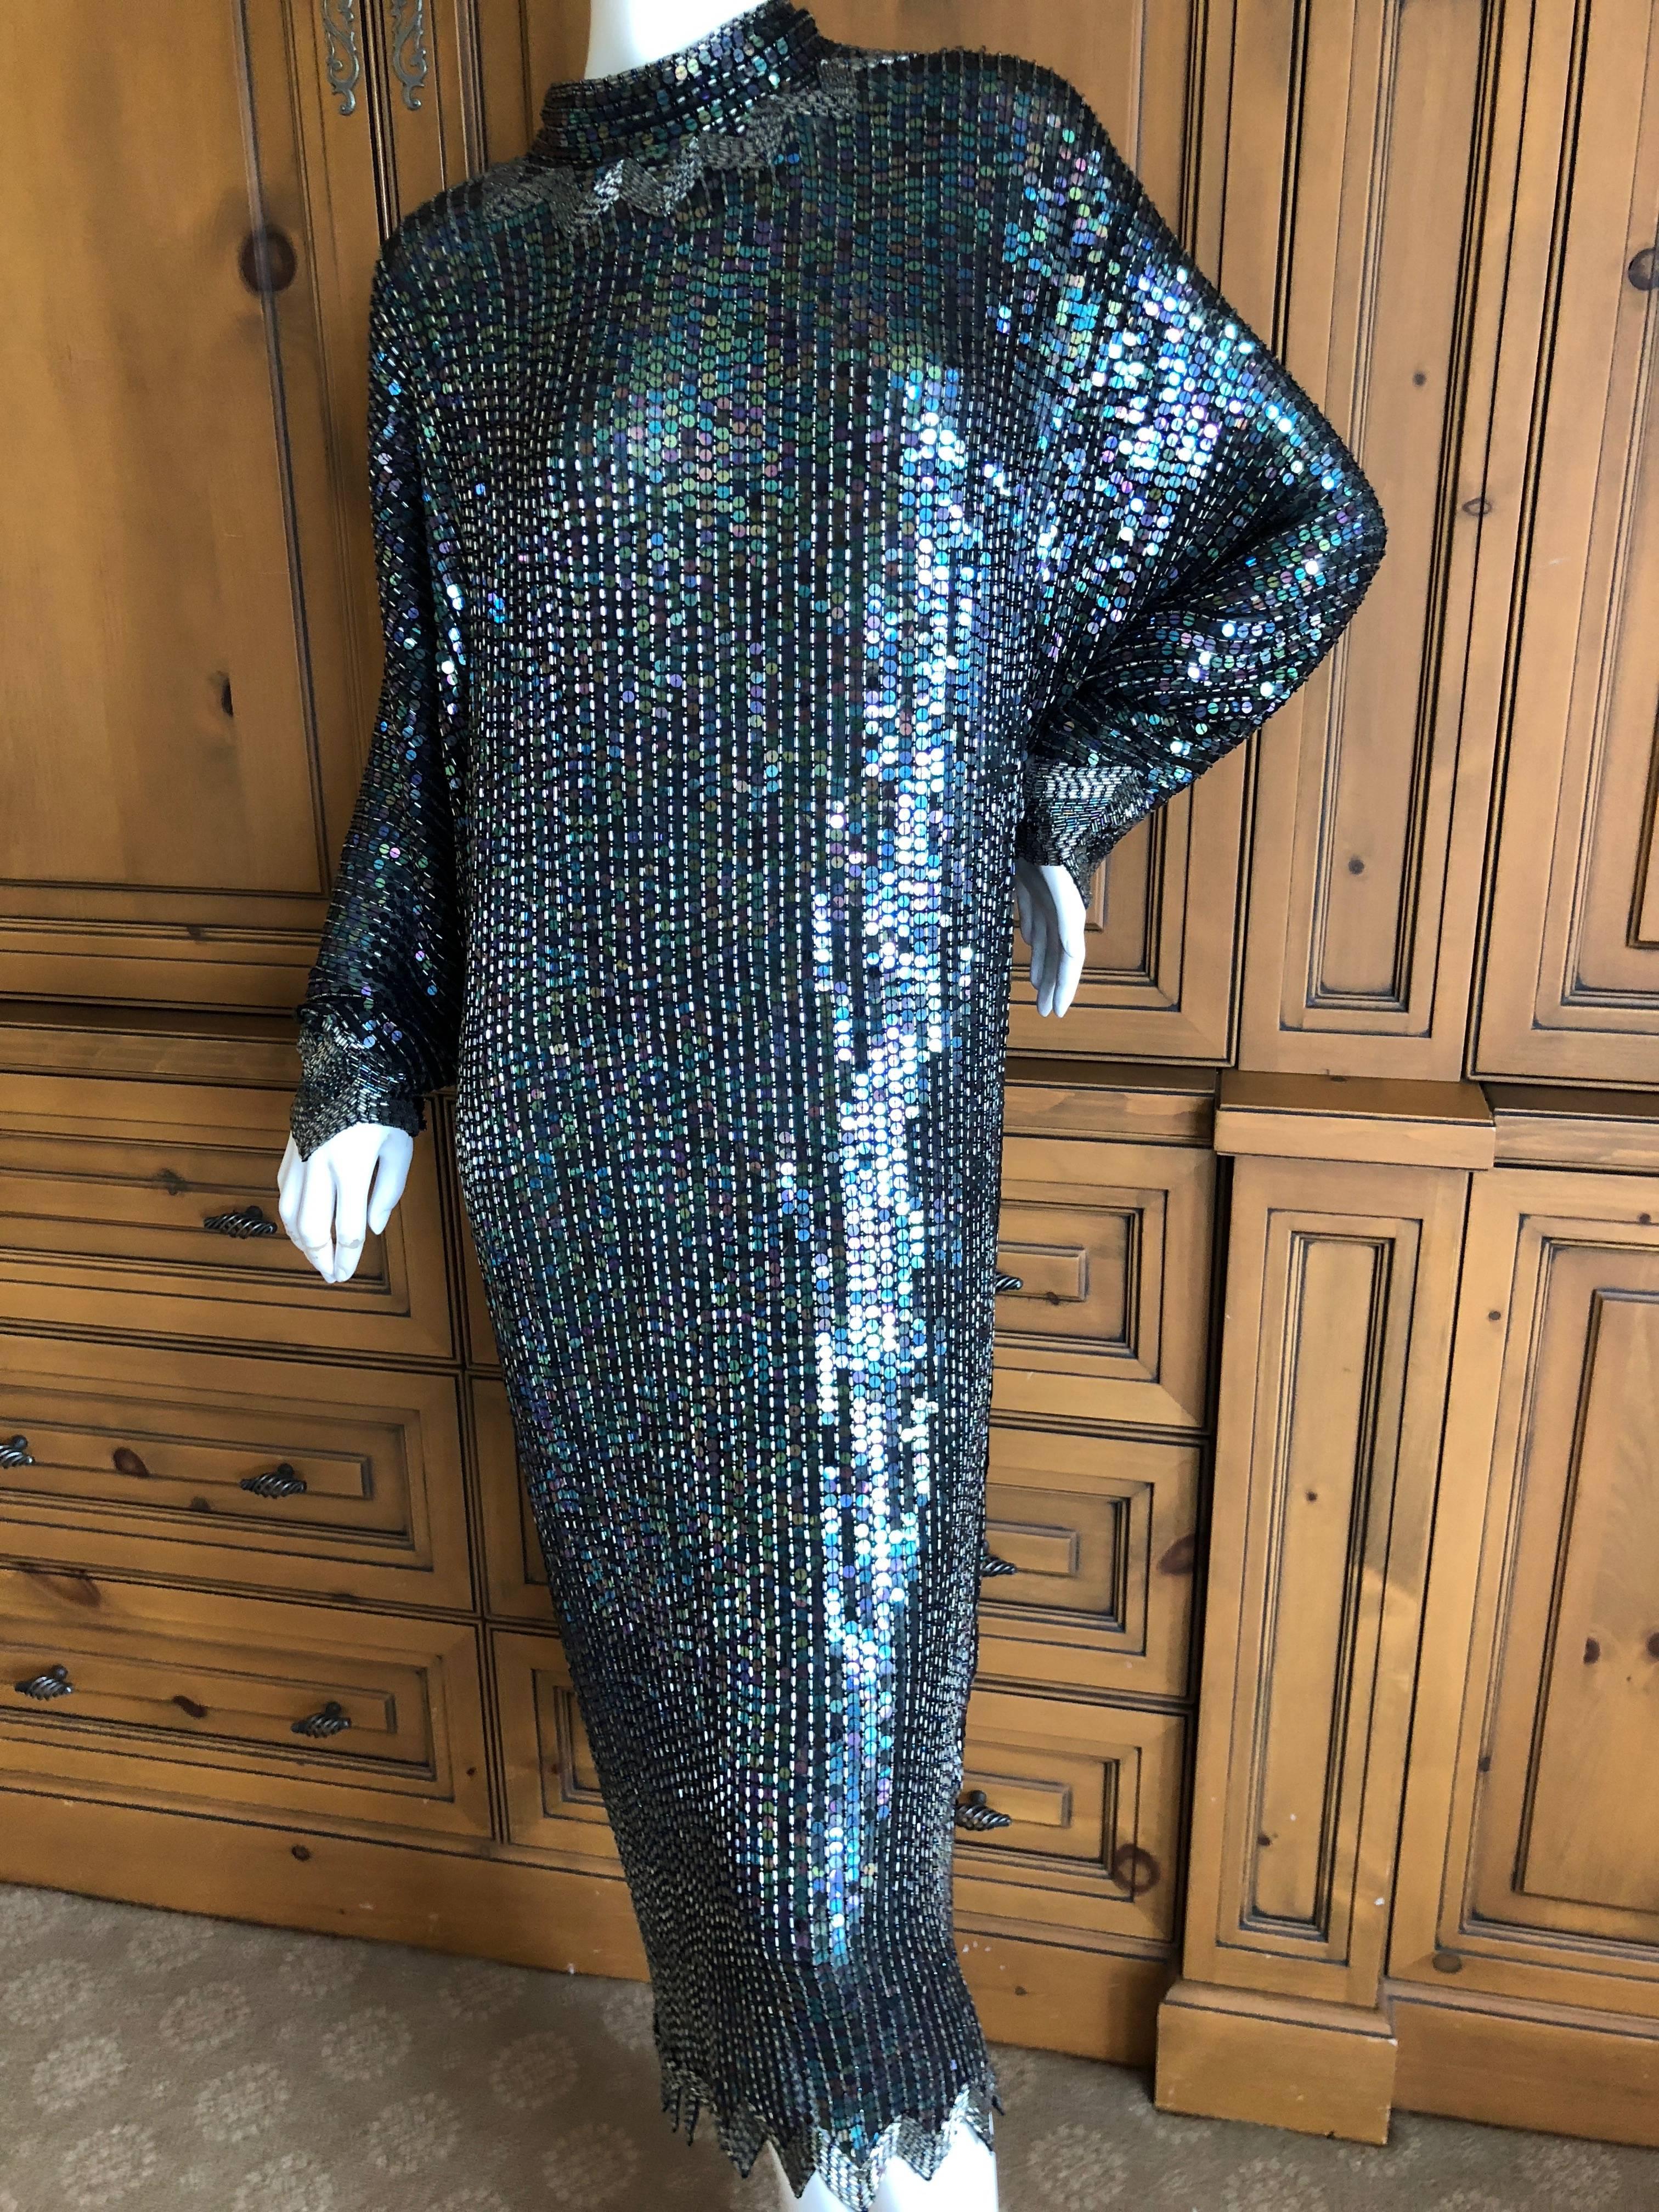 Halston 1970's Iridescent Sequin Bugle Bead Embellished Batwing Disco Dress.
From I Magnin, once on of San Francisco's chicest fabled department stores.
This is so much prettier than the photos show, and needs to be seen in motion, preferably under